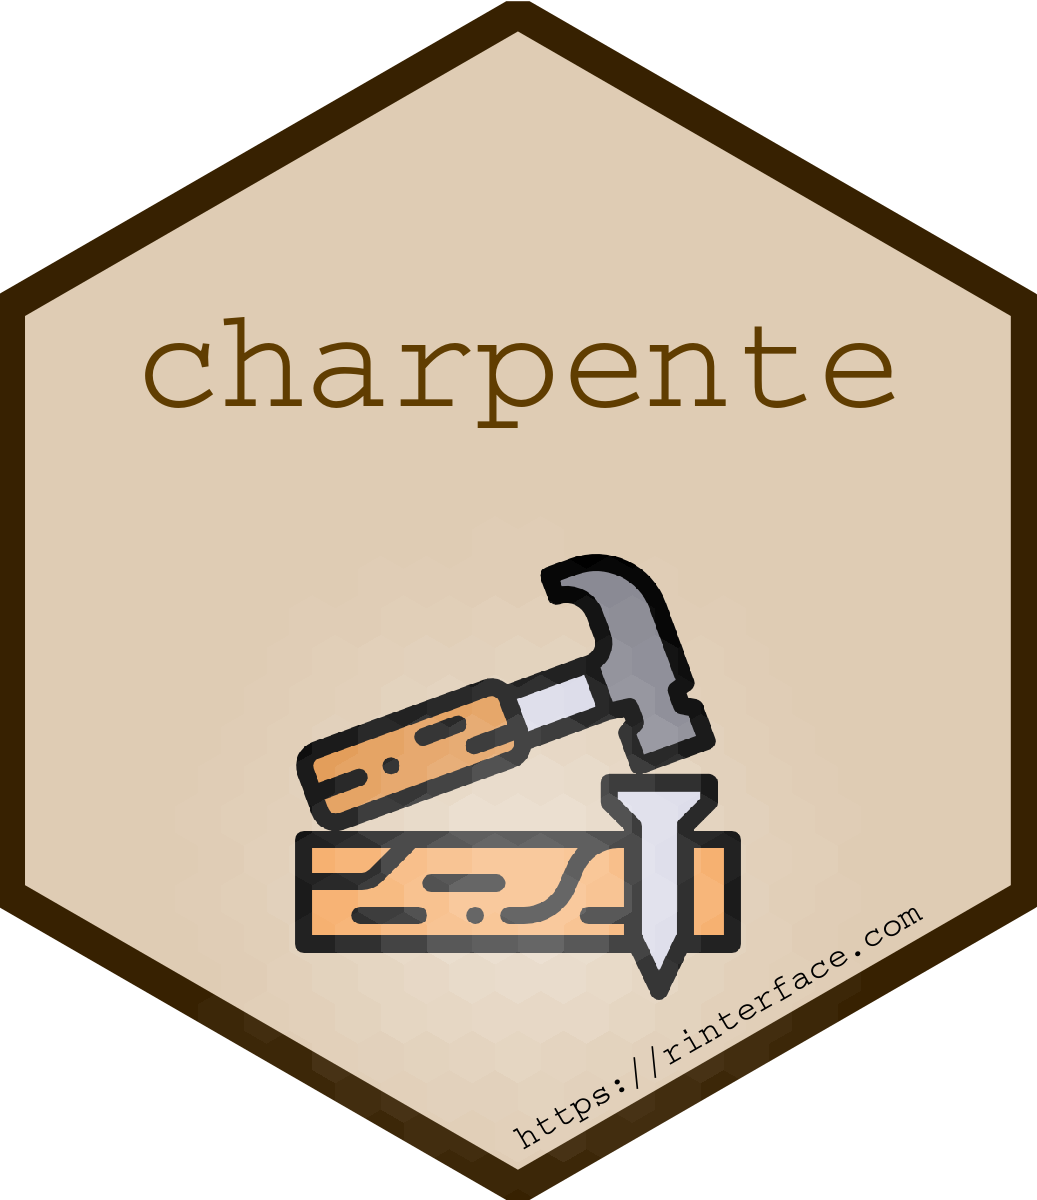 The {charpente} package.